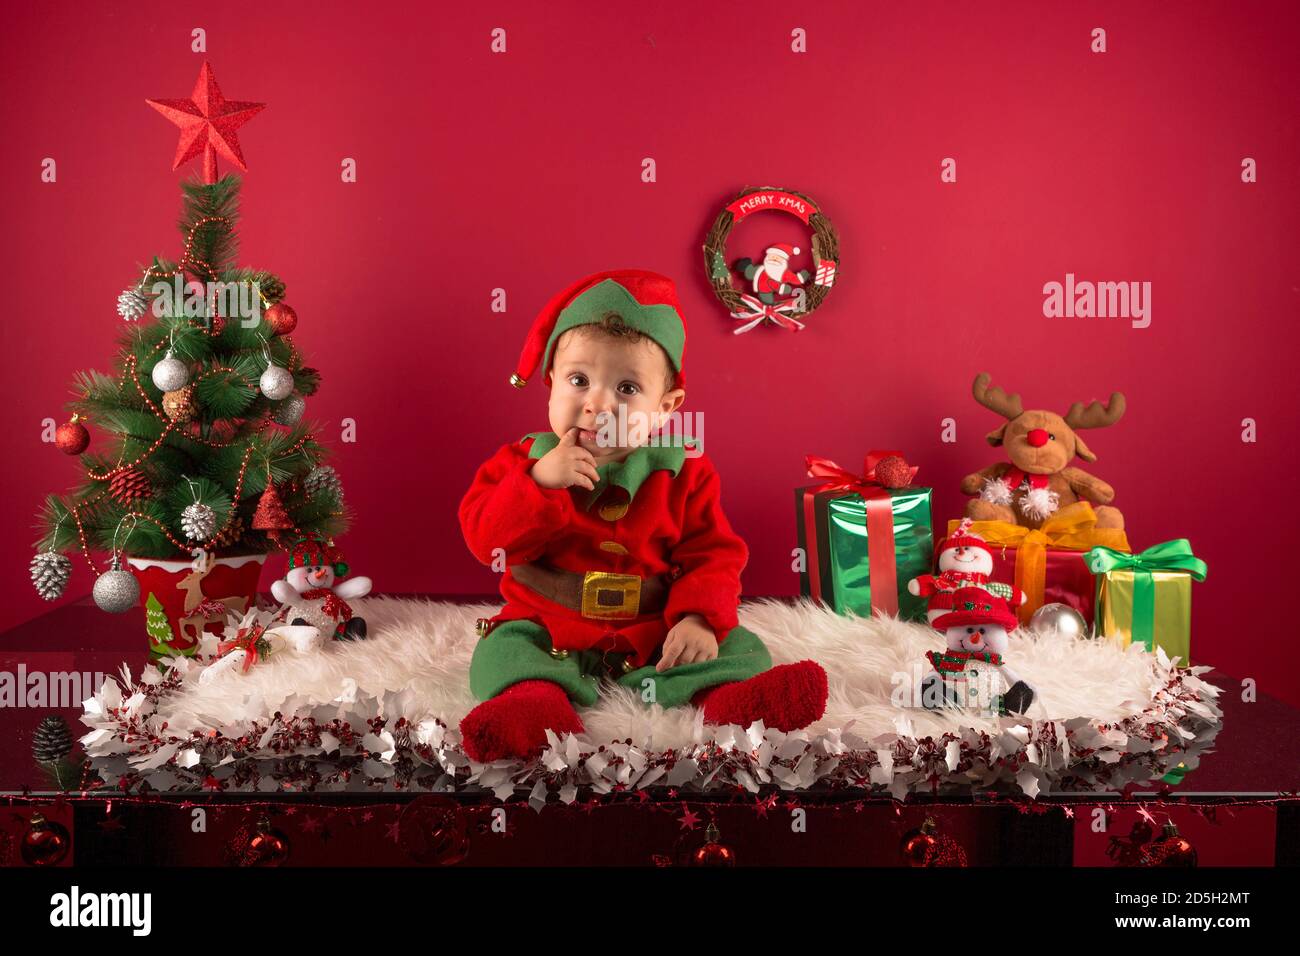 Sweet one-year-old boy dressed as an elf, in Christmas decoration, with gifts and typical tree Stock Photo